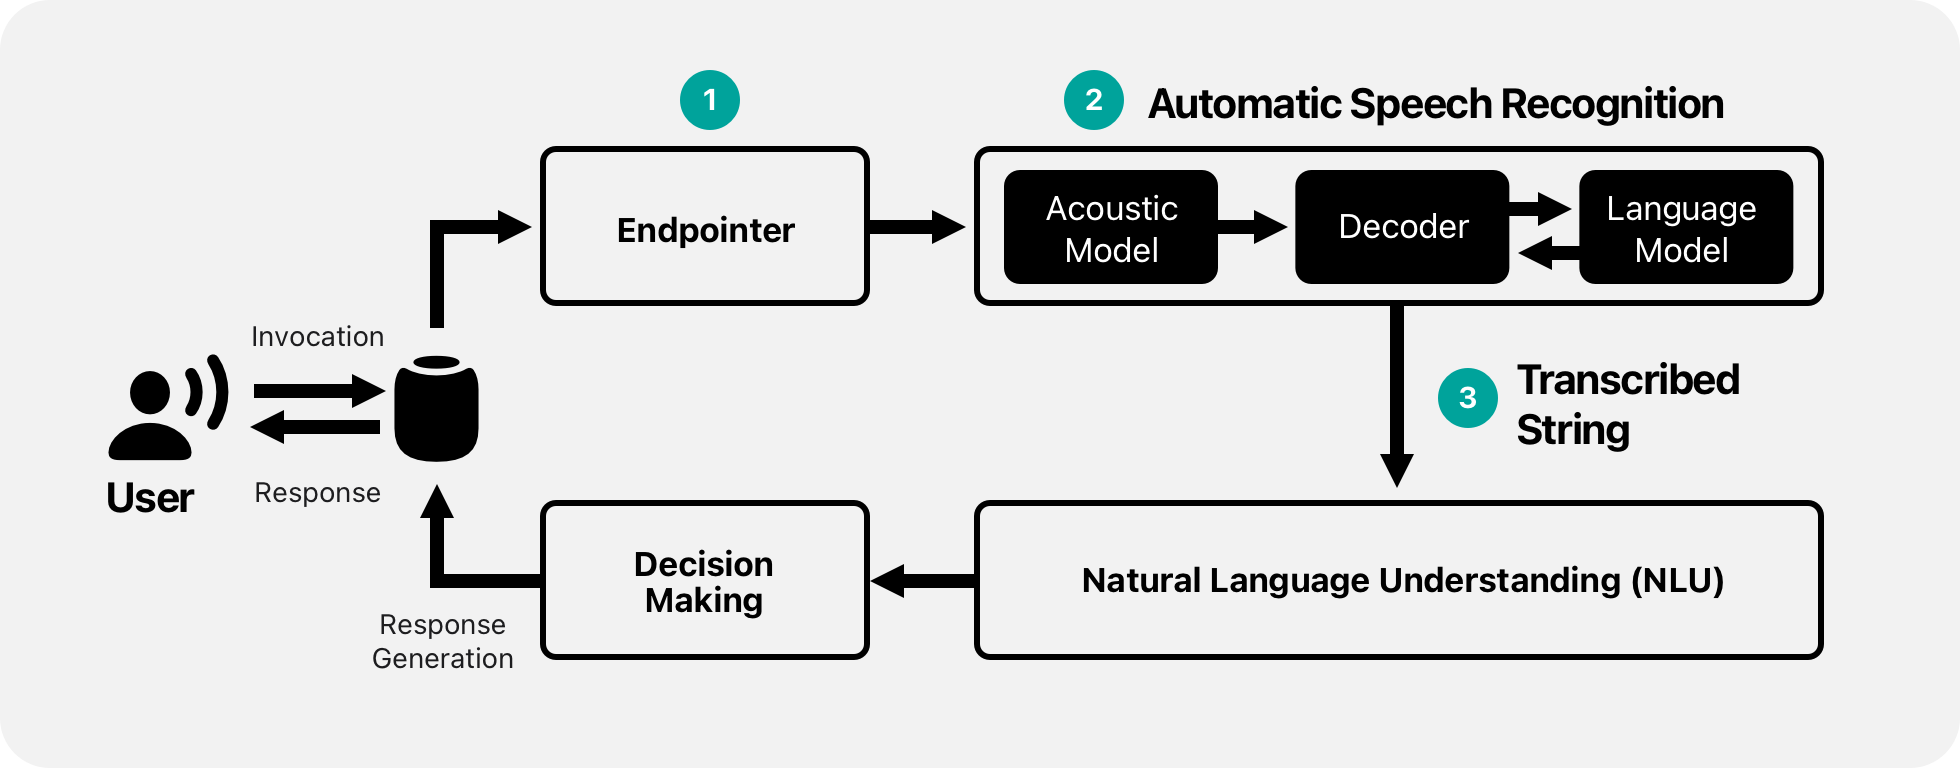 Figure 1: Simplified workflow and components of a voice assistant.